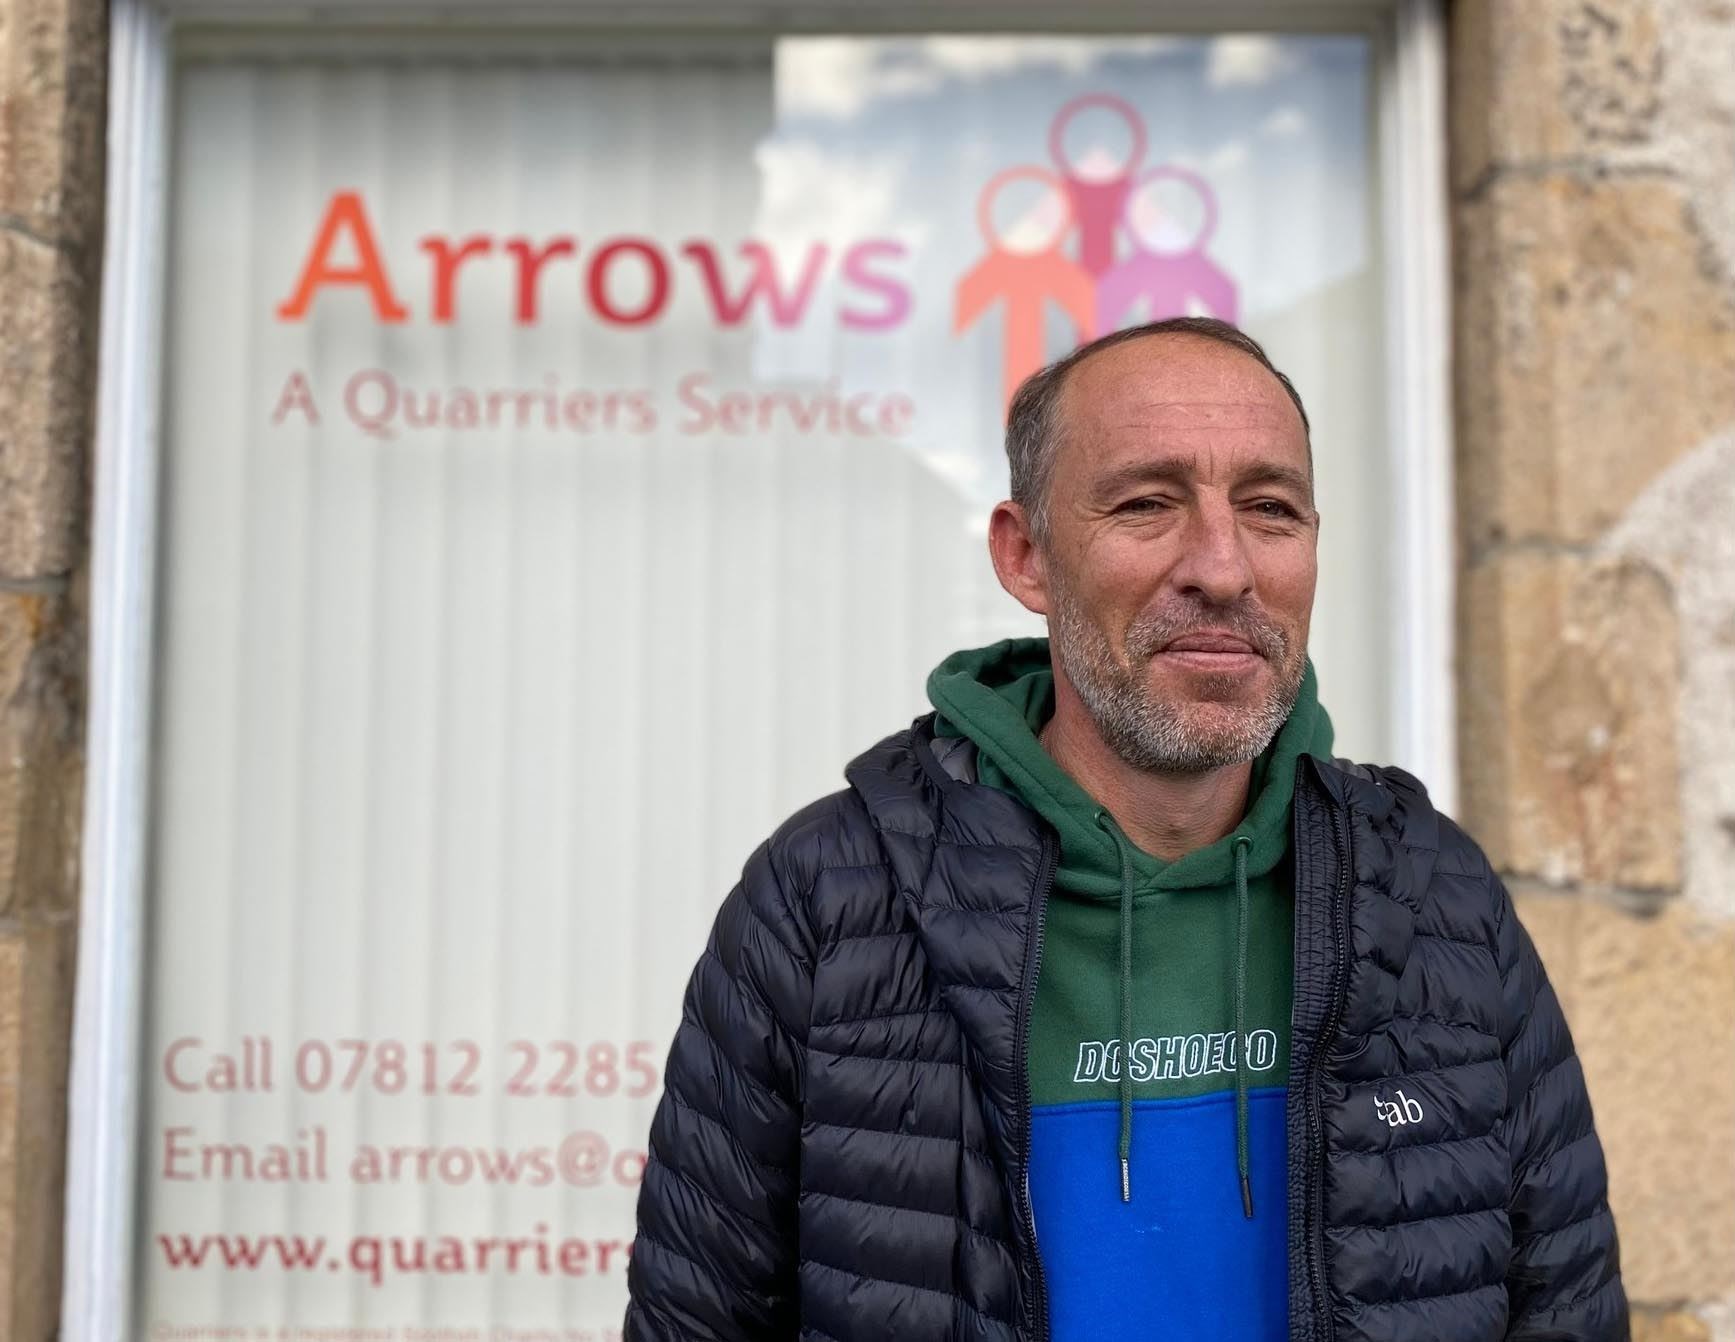 Justin Jansen, Project Manager of Quarriers Arrows Service in Elgin.